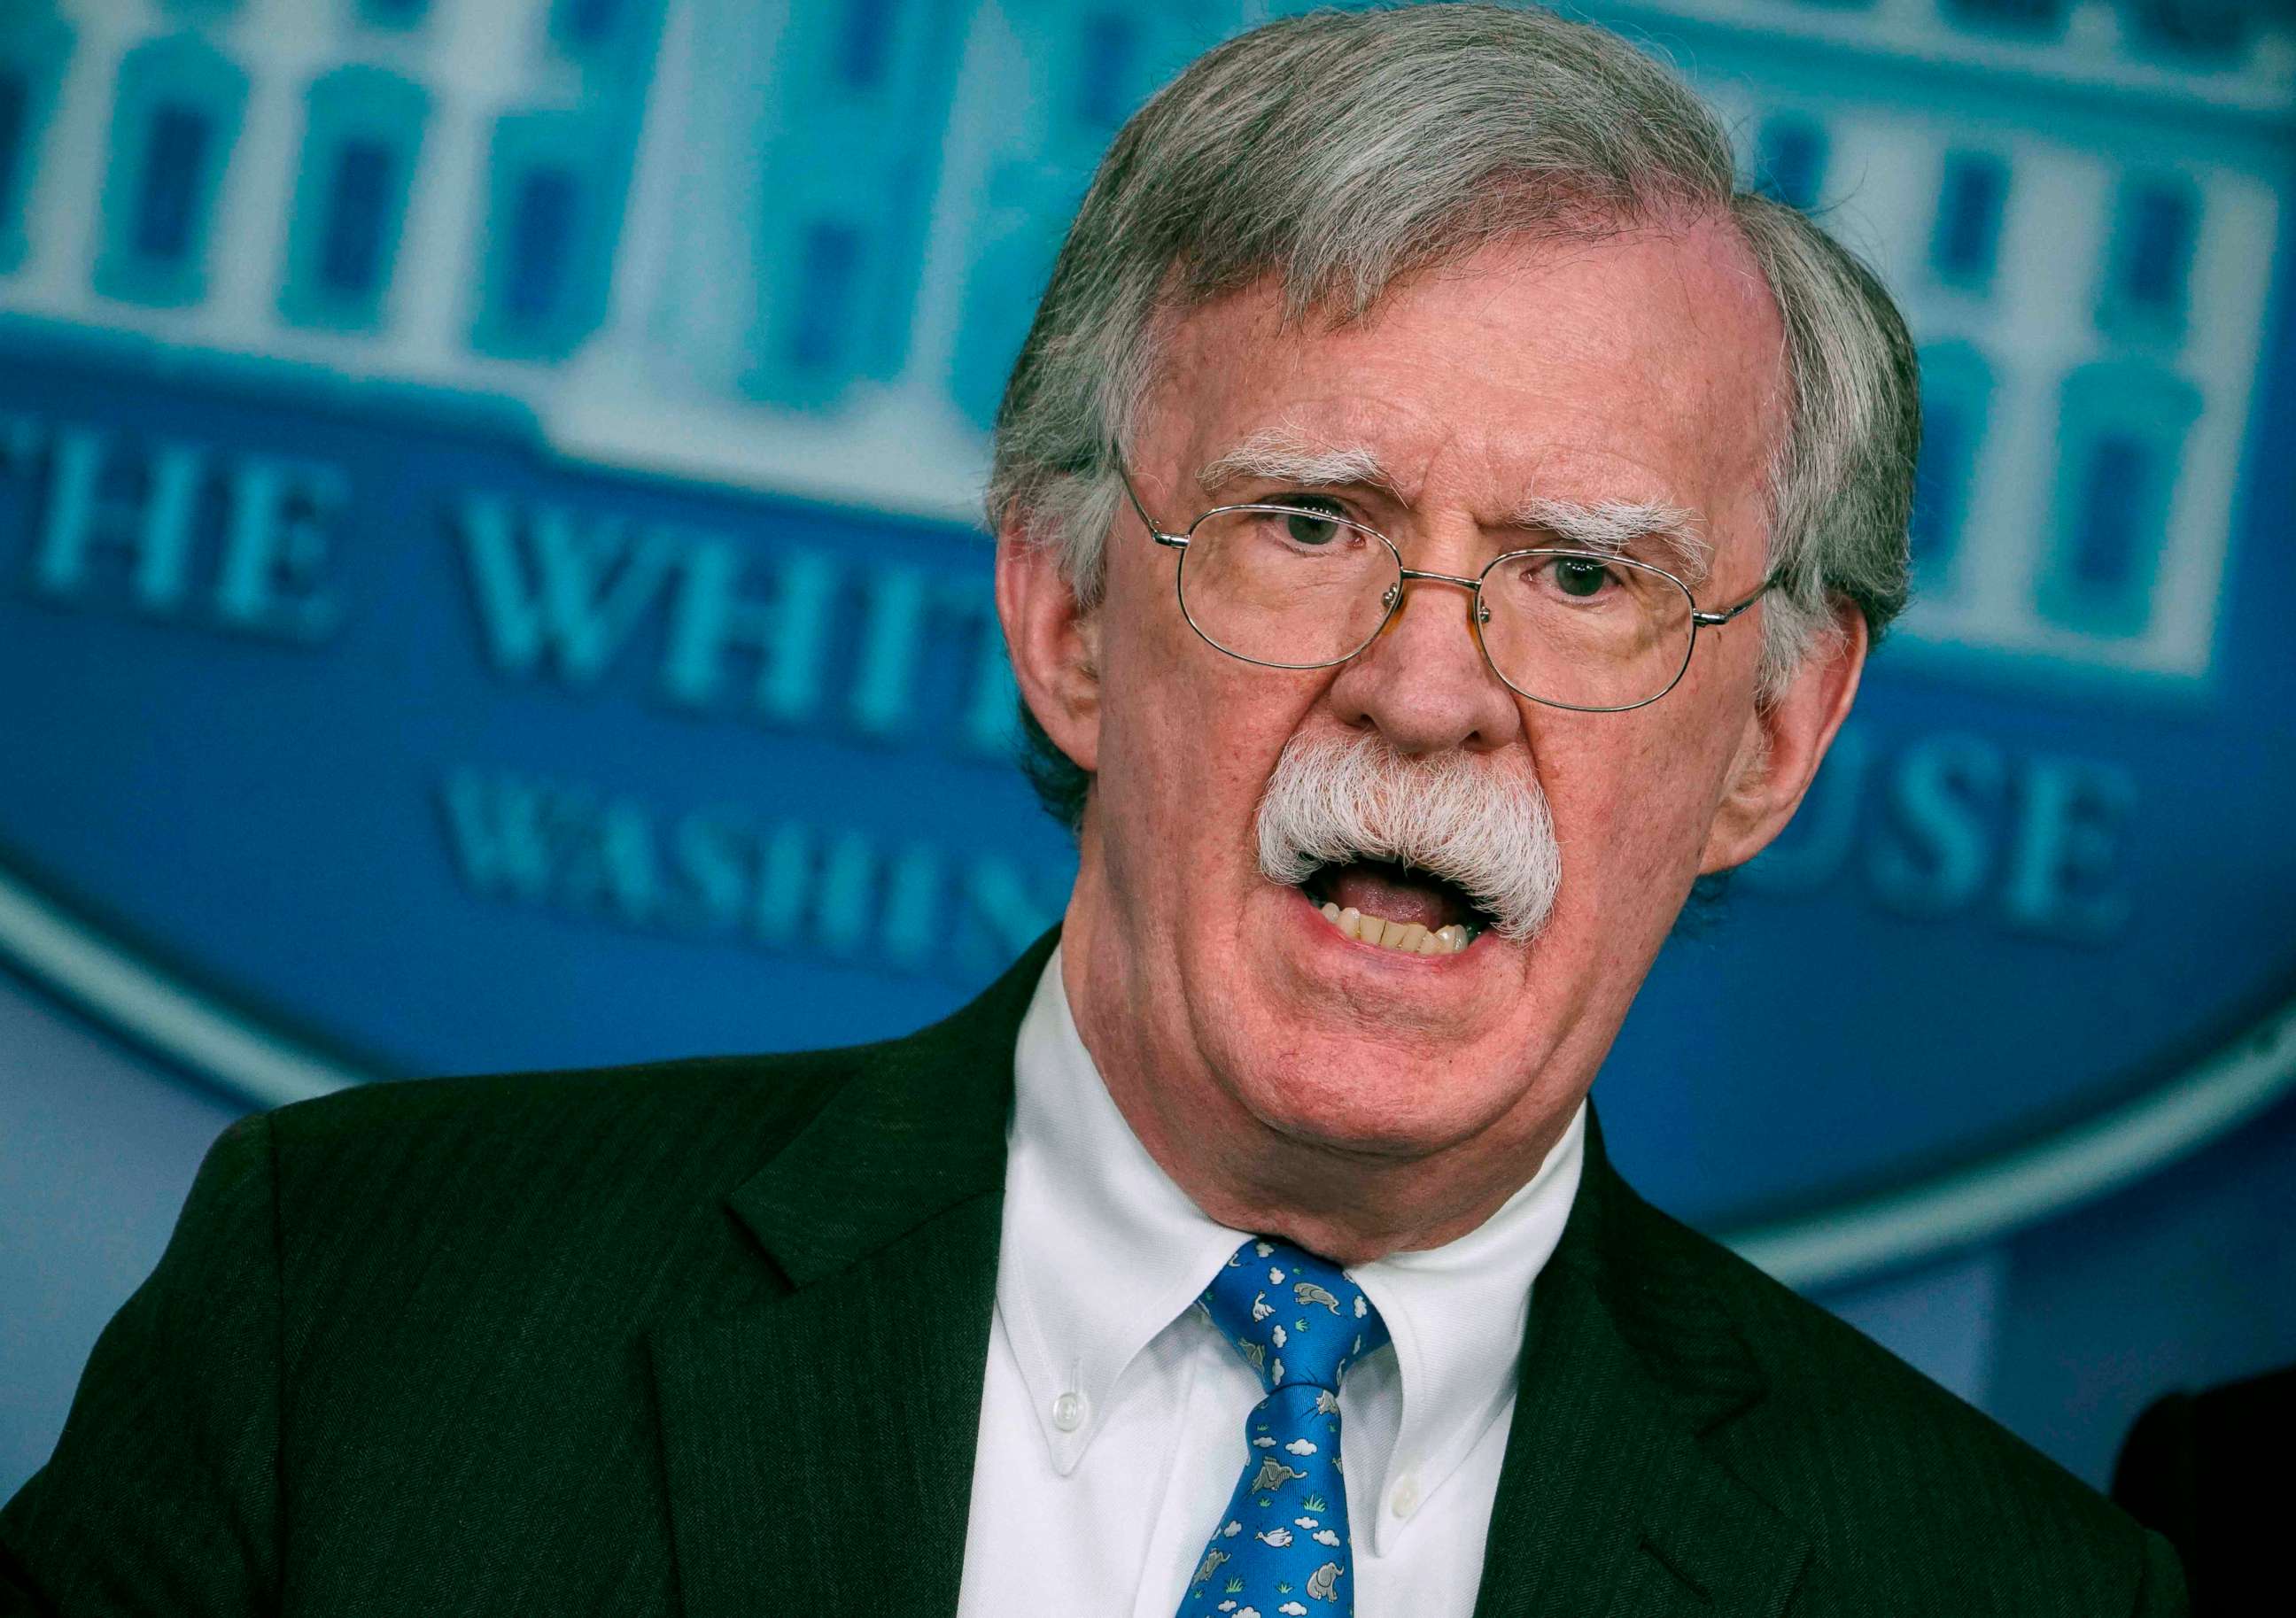 PHOTO: National Security Advisor John Bolton speaks during a briefing in the Brady Briefing Room of the White House in Washington, DC, Jan. 28, 2019.